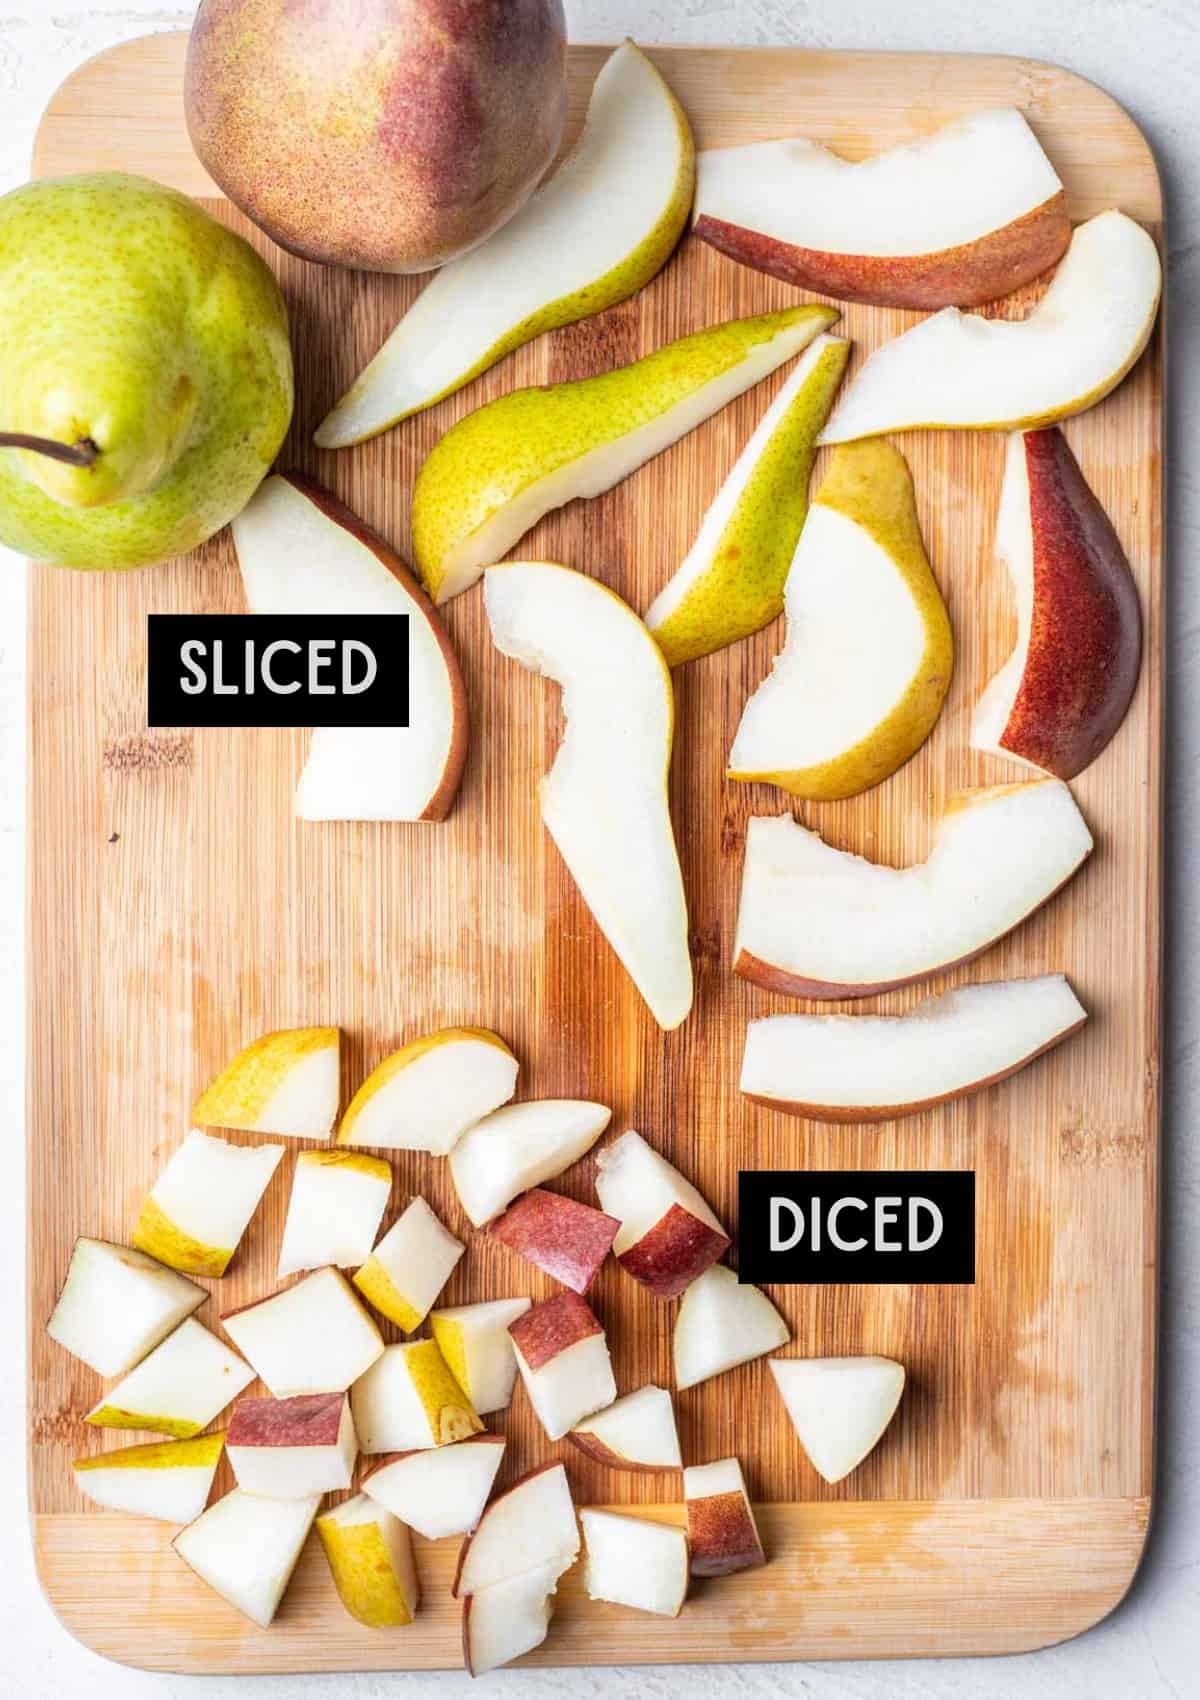 Sliced and diced pears on a cutting board.